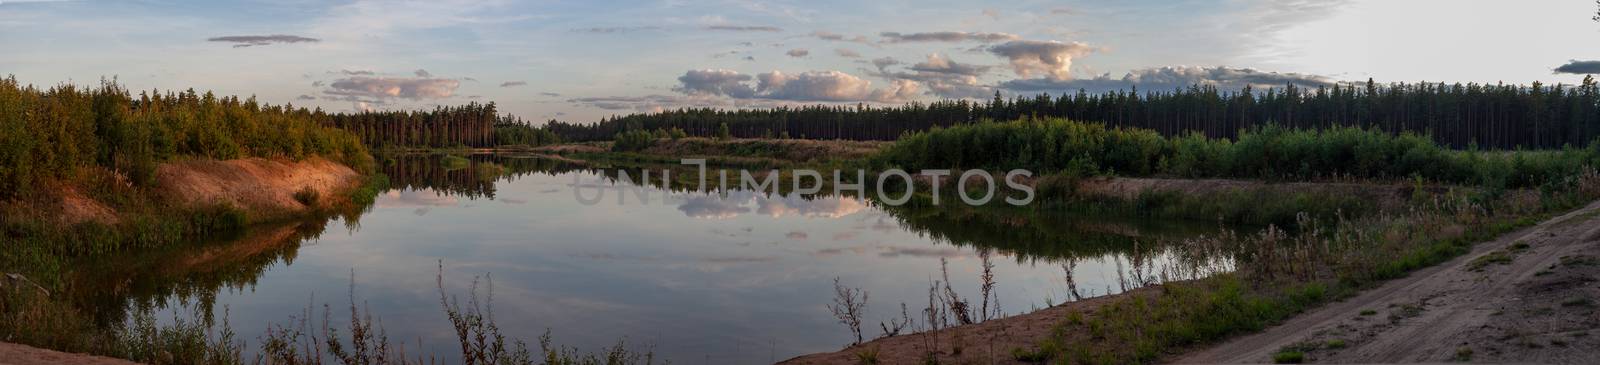 Lake and pine forest at the sunset by Angorius